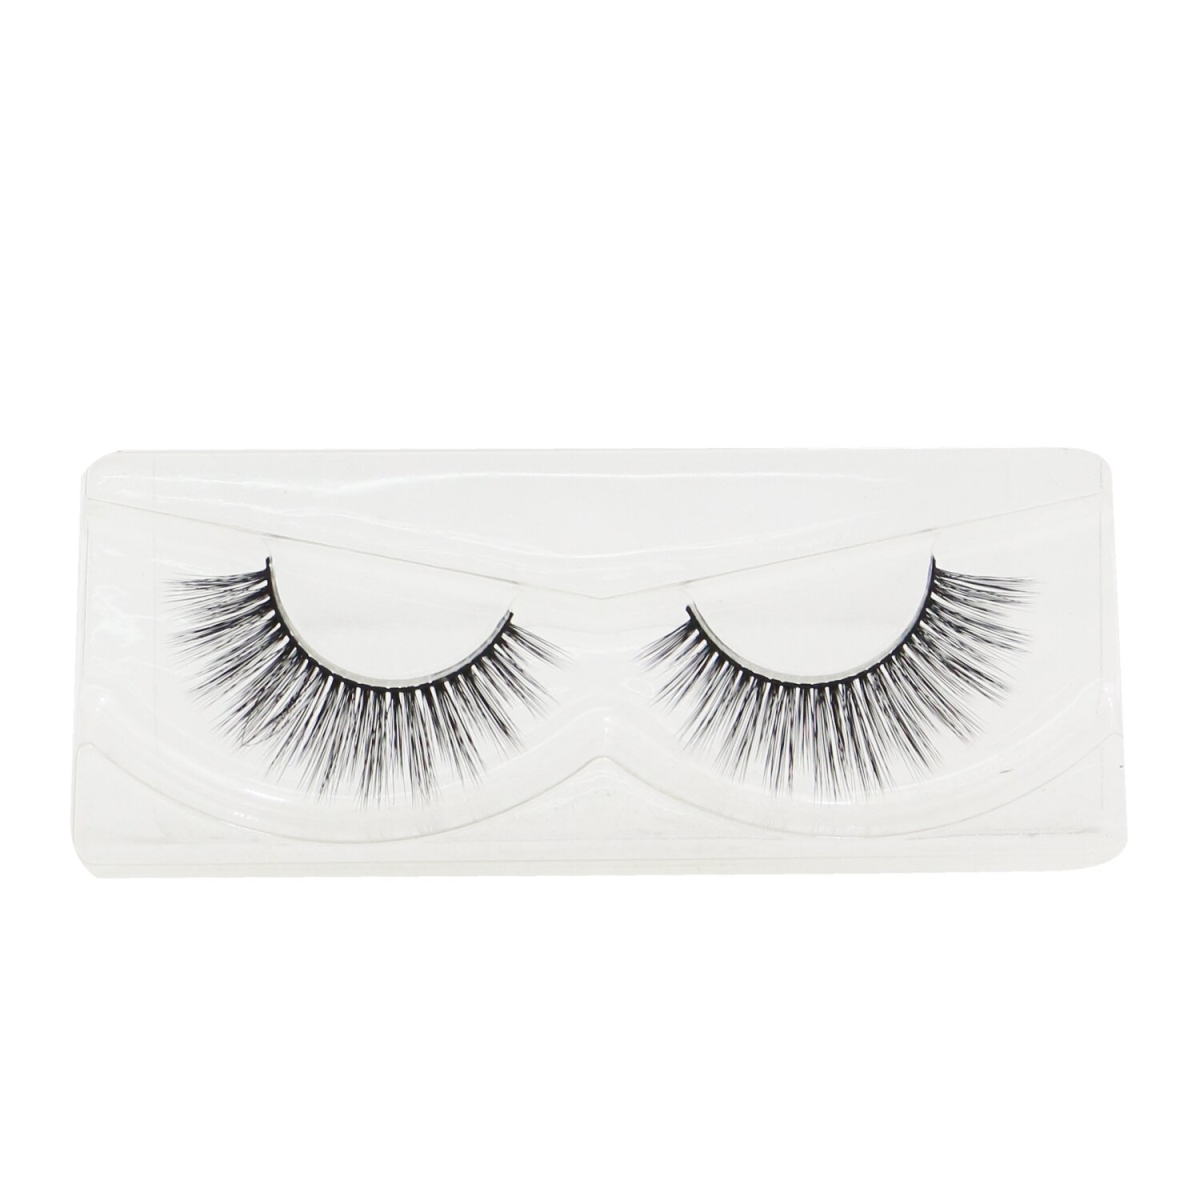 Picture of Lash Star 263457 Visionary Eye Lashes, No.007 9-12 mm, Very Full Volume